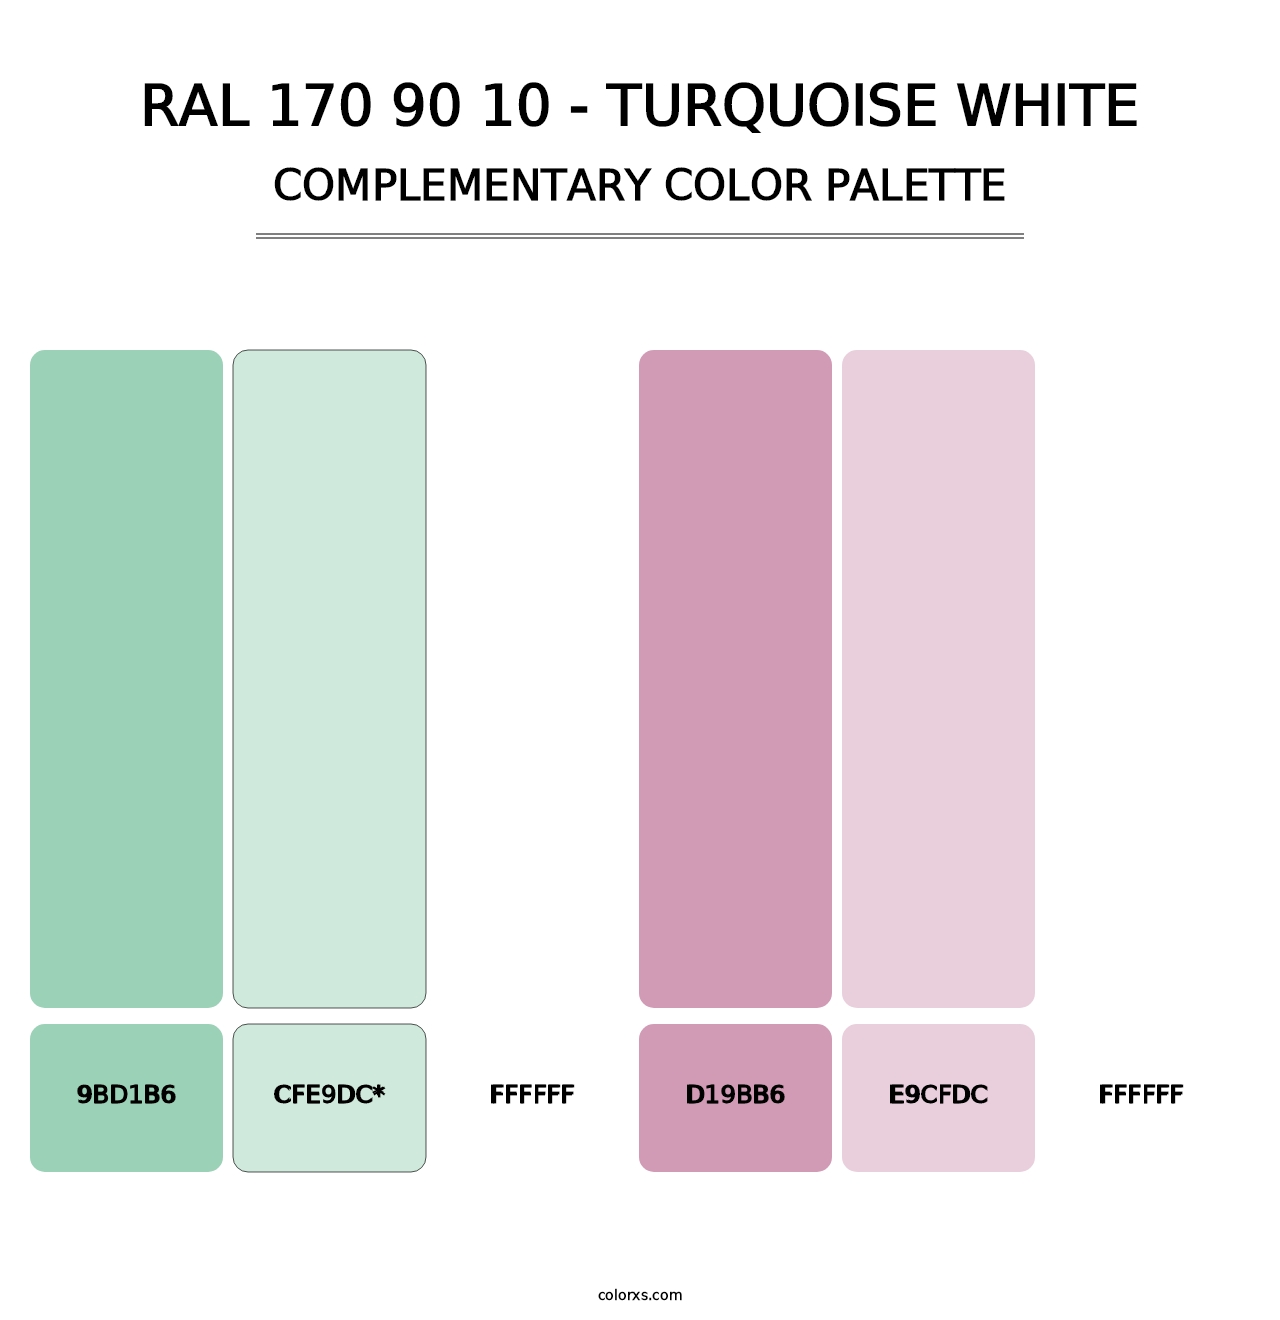 RAL 170 90 10 - Turquoise White - Complementary Color Palette